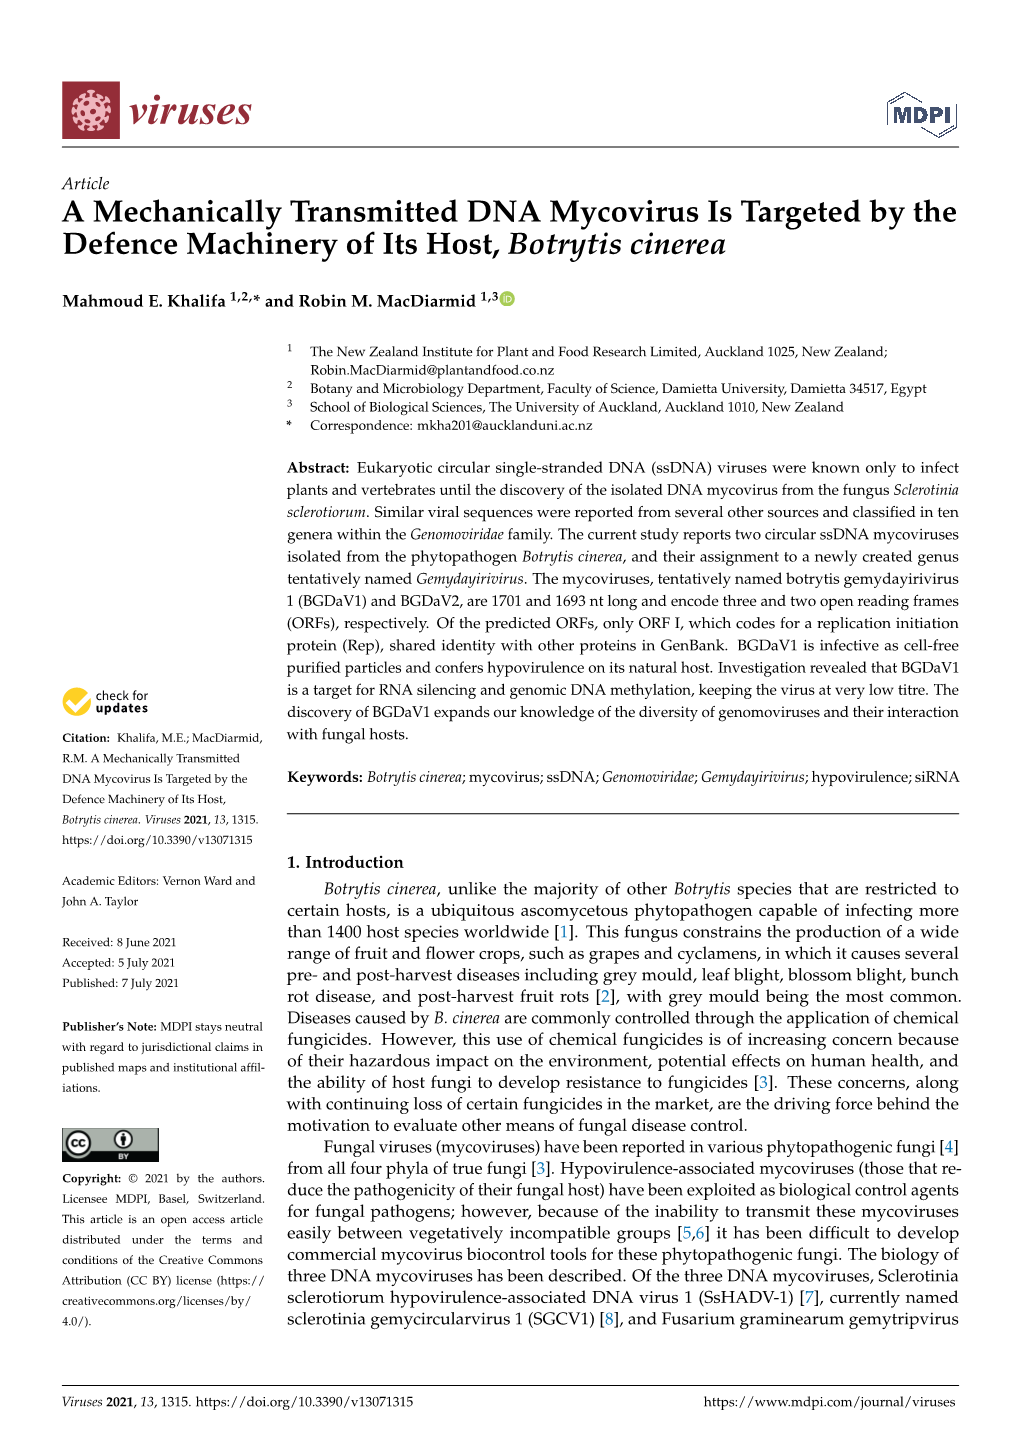 A Mechanically Transmitted DNA Mycovirus Is Targeted by the Defence Machinery of Its Host, Botrytis Cinerea